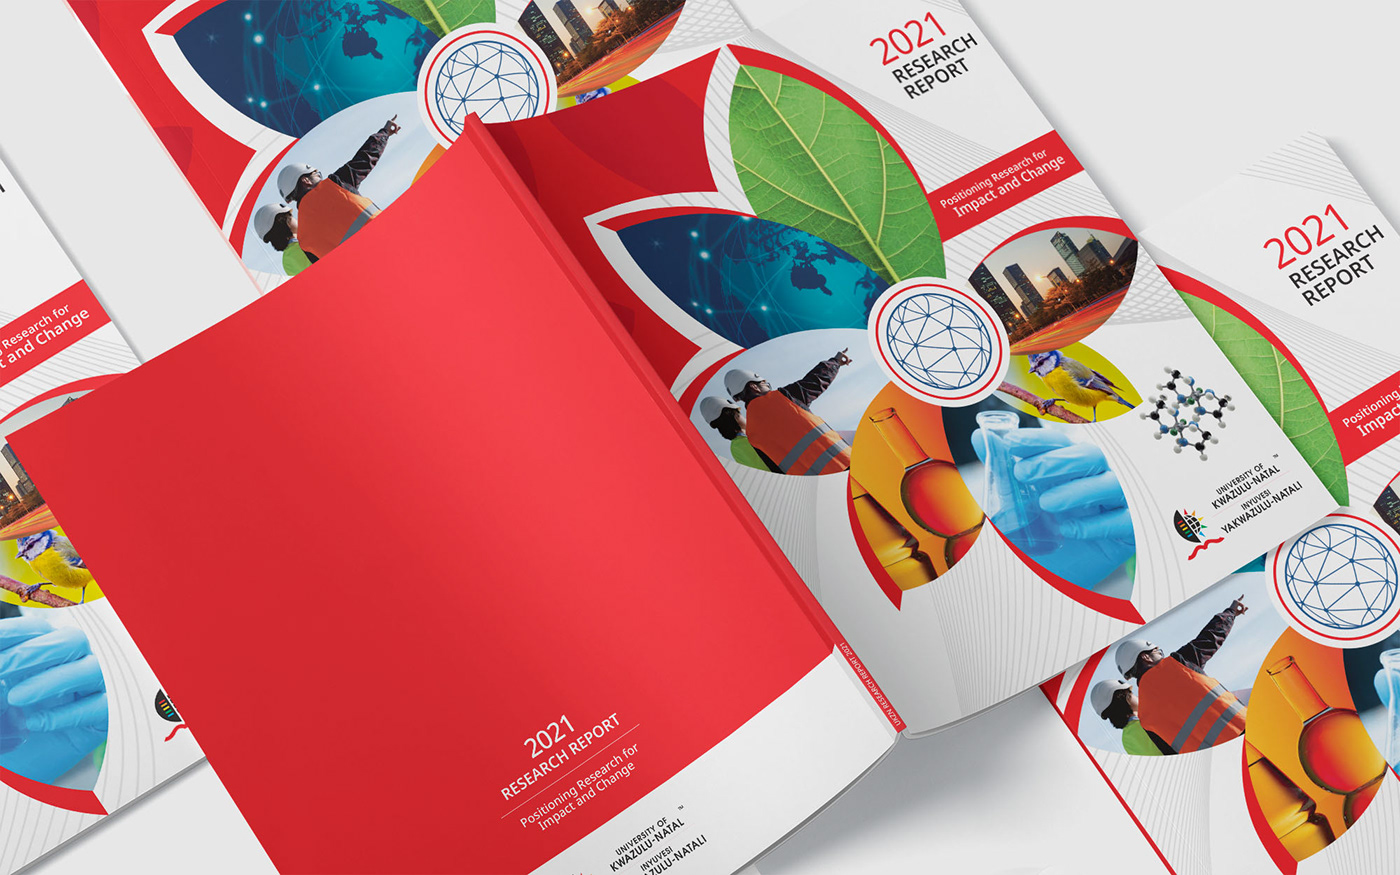 Annual Report Design Research Report data visualization information design Layout brand identity university project south africa typesetting durban